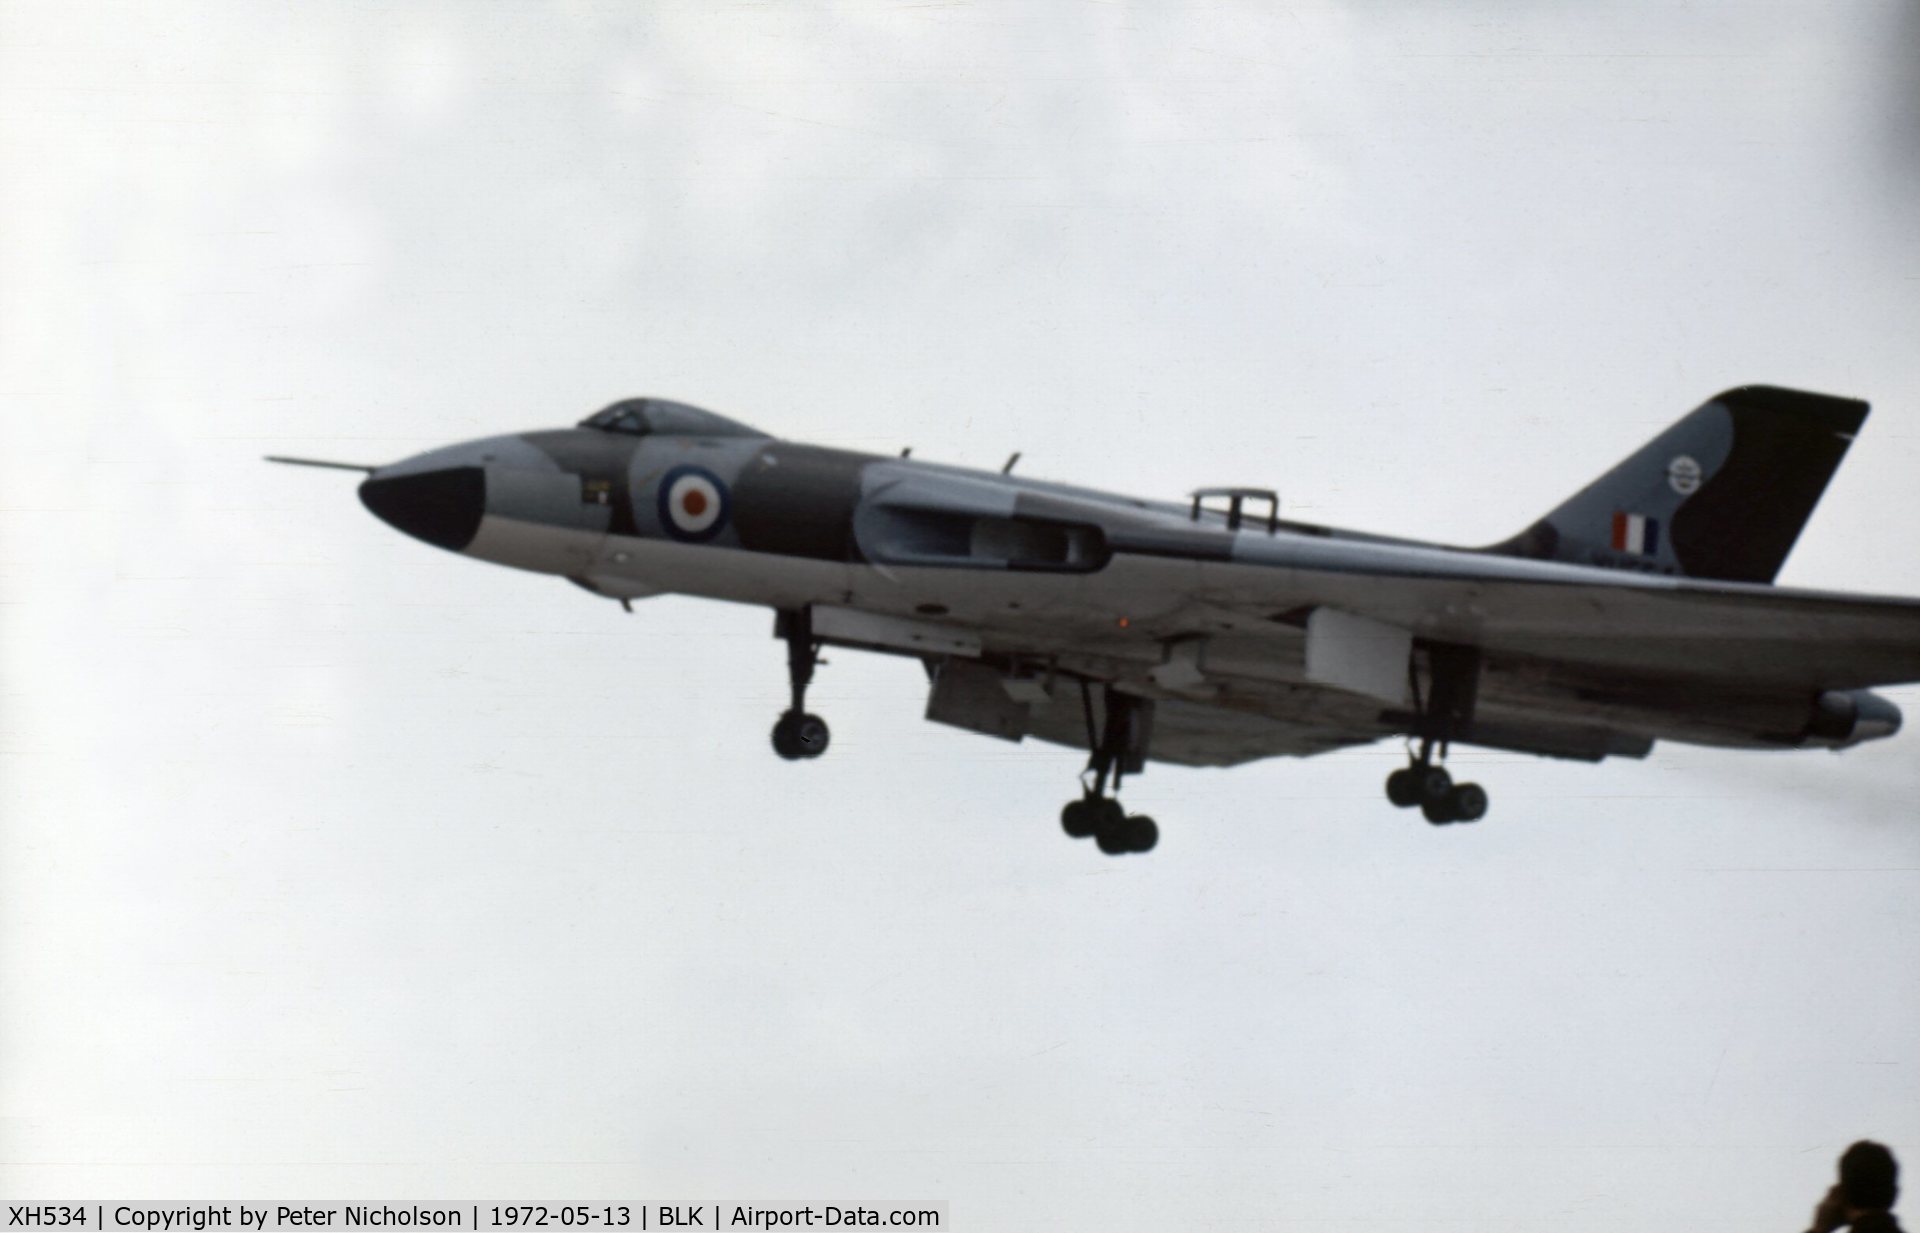 XH534, 1966 Avro Vulcan B.2 C/N Set 2, Vulcan B.2 of 230 Operational Conversion Unit landing at the Blackpool Airshow of 1972. Spectator visible at lower right corner gives some guide to the height of the Vulcan.